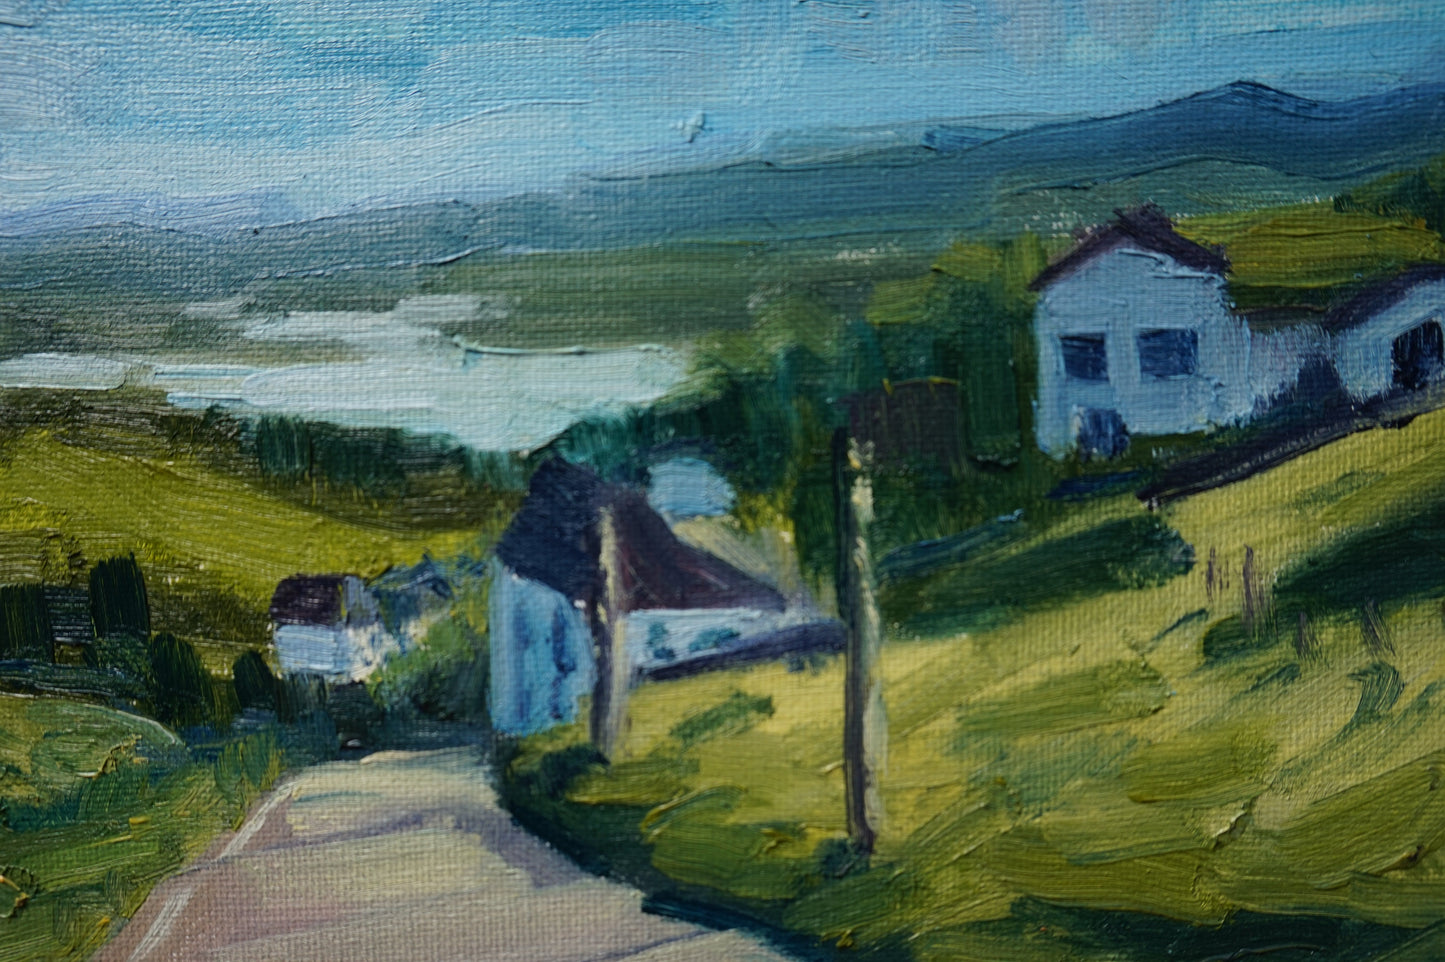 Country drive - 20x25.5cm / Oil painting on canvas panel